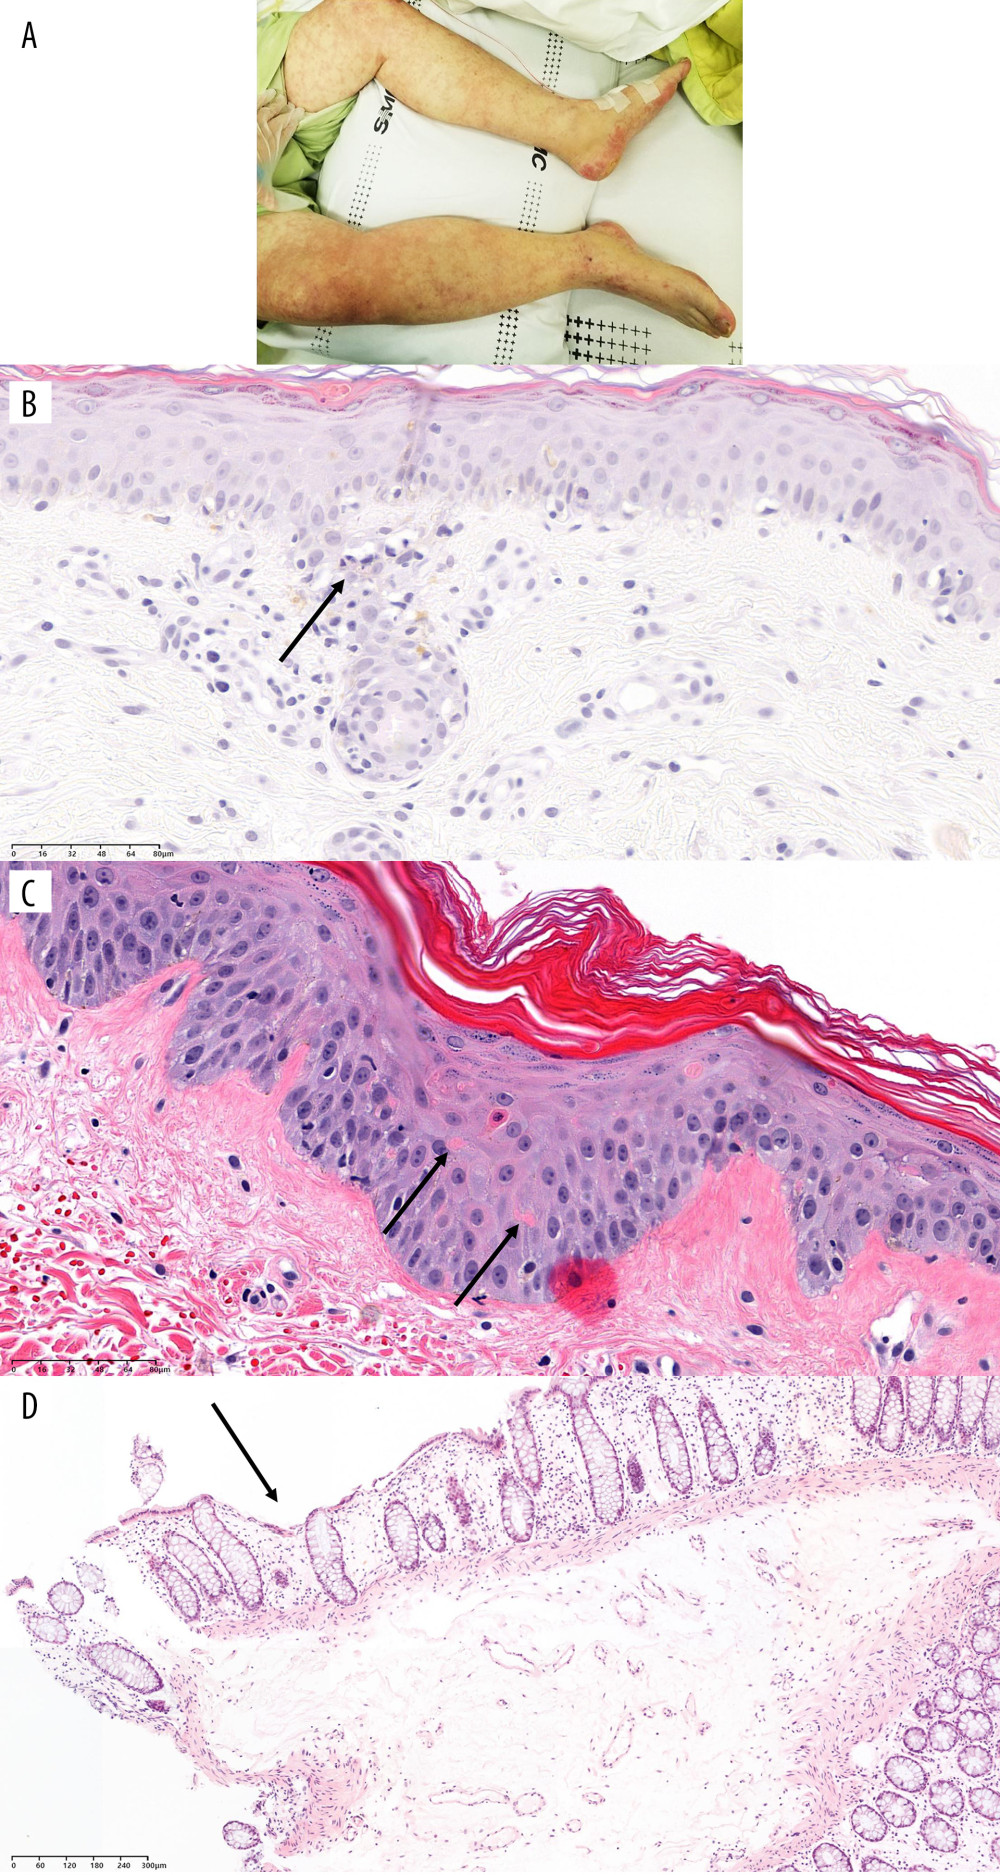 Physical and pathological findings of patients suspected to have graft-versus-host diseases and confirmation of donor chimerism. (A) Skin rash of case 1. (B) Trunk tissue biopsy findings of case 1 showing vacuolization (arrow) and basal cell degeneration. (C) Trunk tissue biopsy findings of case 2 showing an eosinophilic body at the lower layer of the epidermis (arrows). (D) Colonoscopic biopsy findings of case 3 exhibiting ulcer (arrow) and decreased number of crypts with size variation. B–D: hematoxylin and eosin staining. Scale bar is located in the lower-left corner.